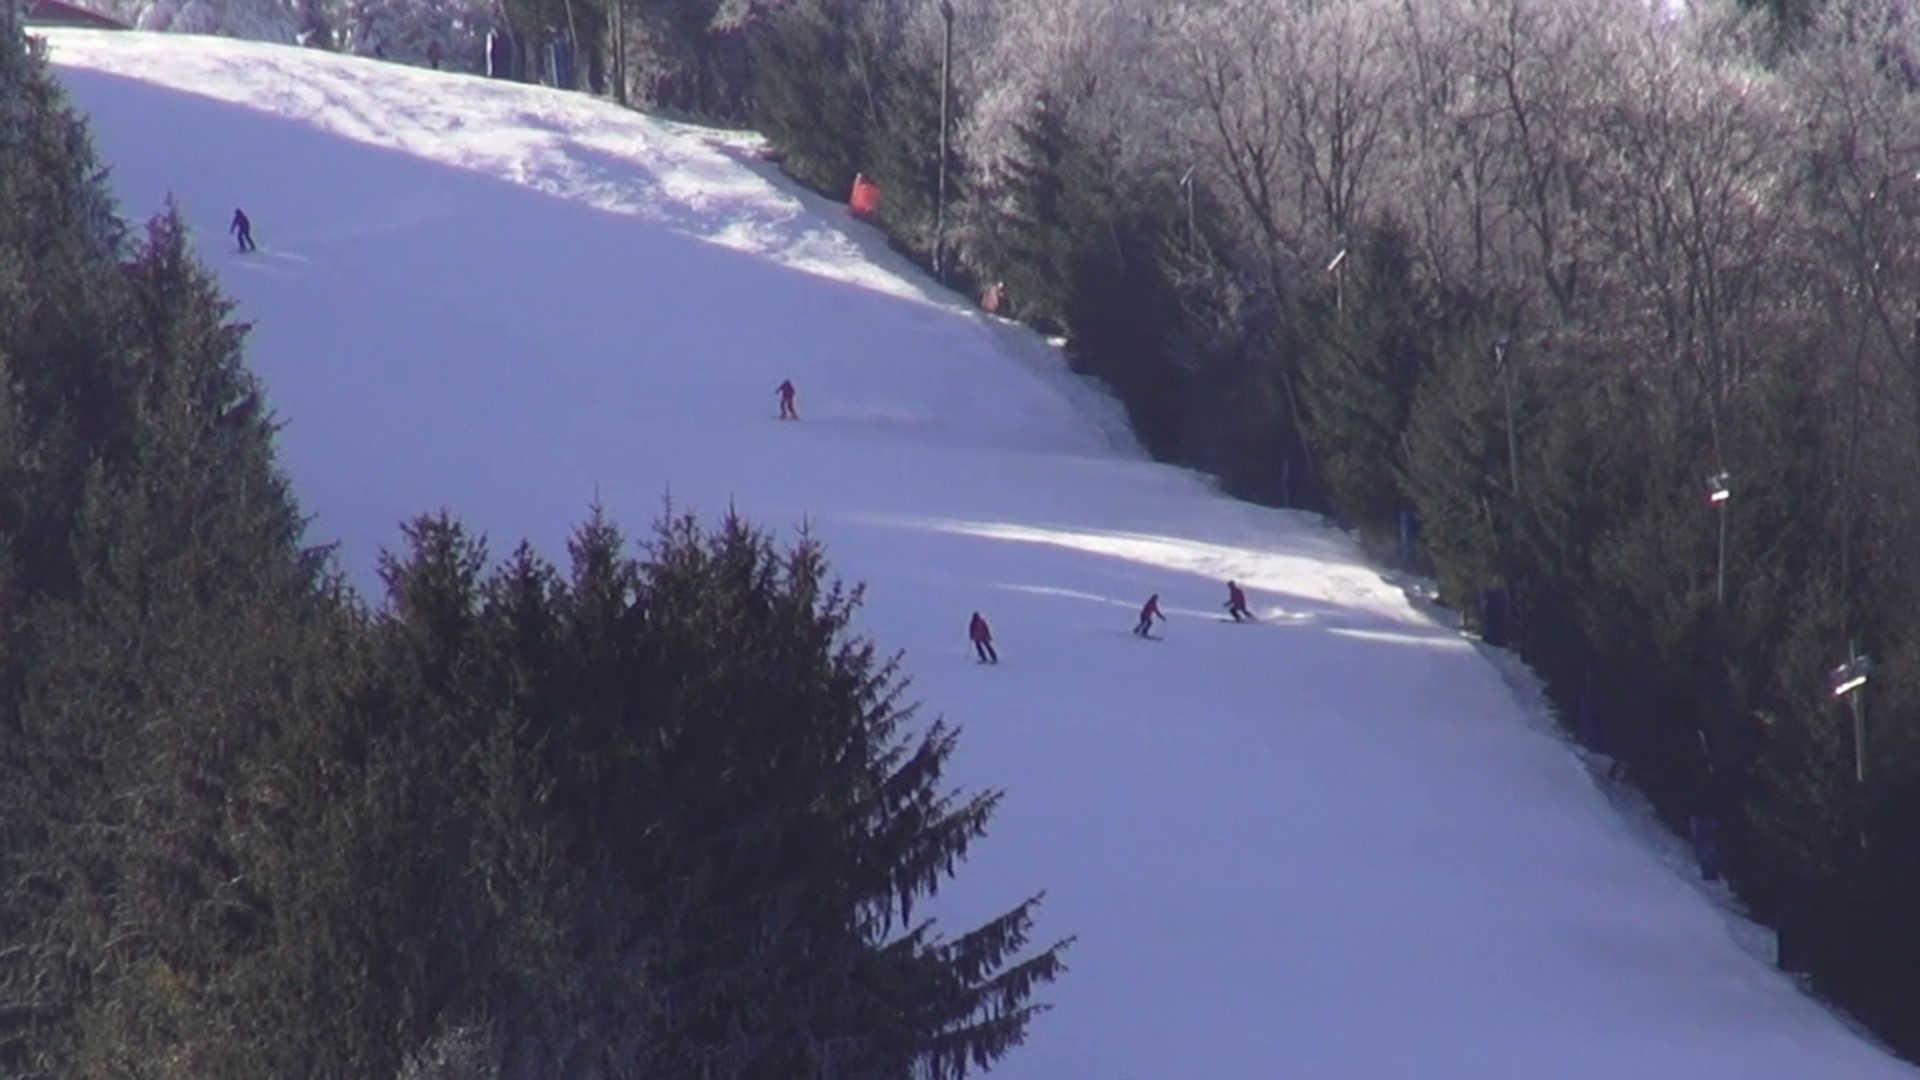 The ski resort in Susquehanna County was forced to close because of warm weather over the weekend but reopened with plenty of snow and skiers.